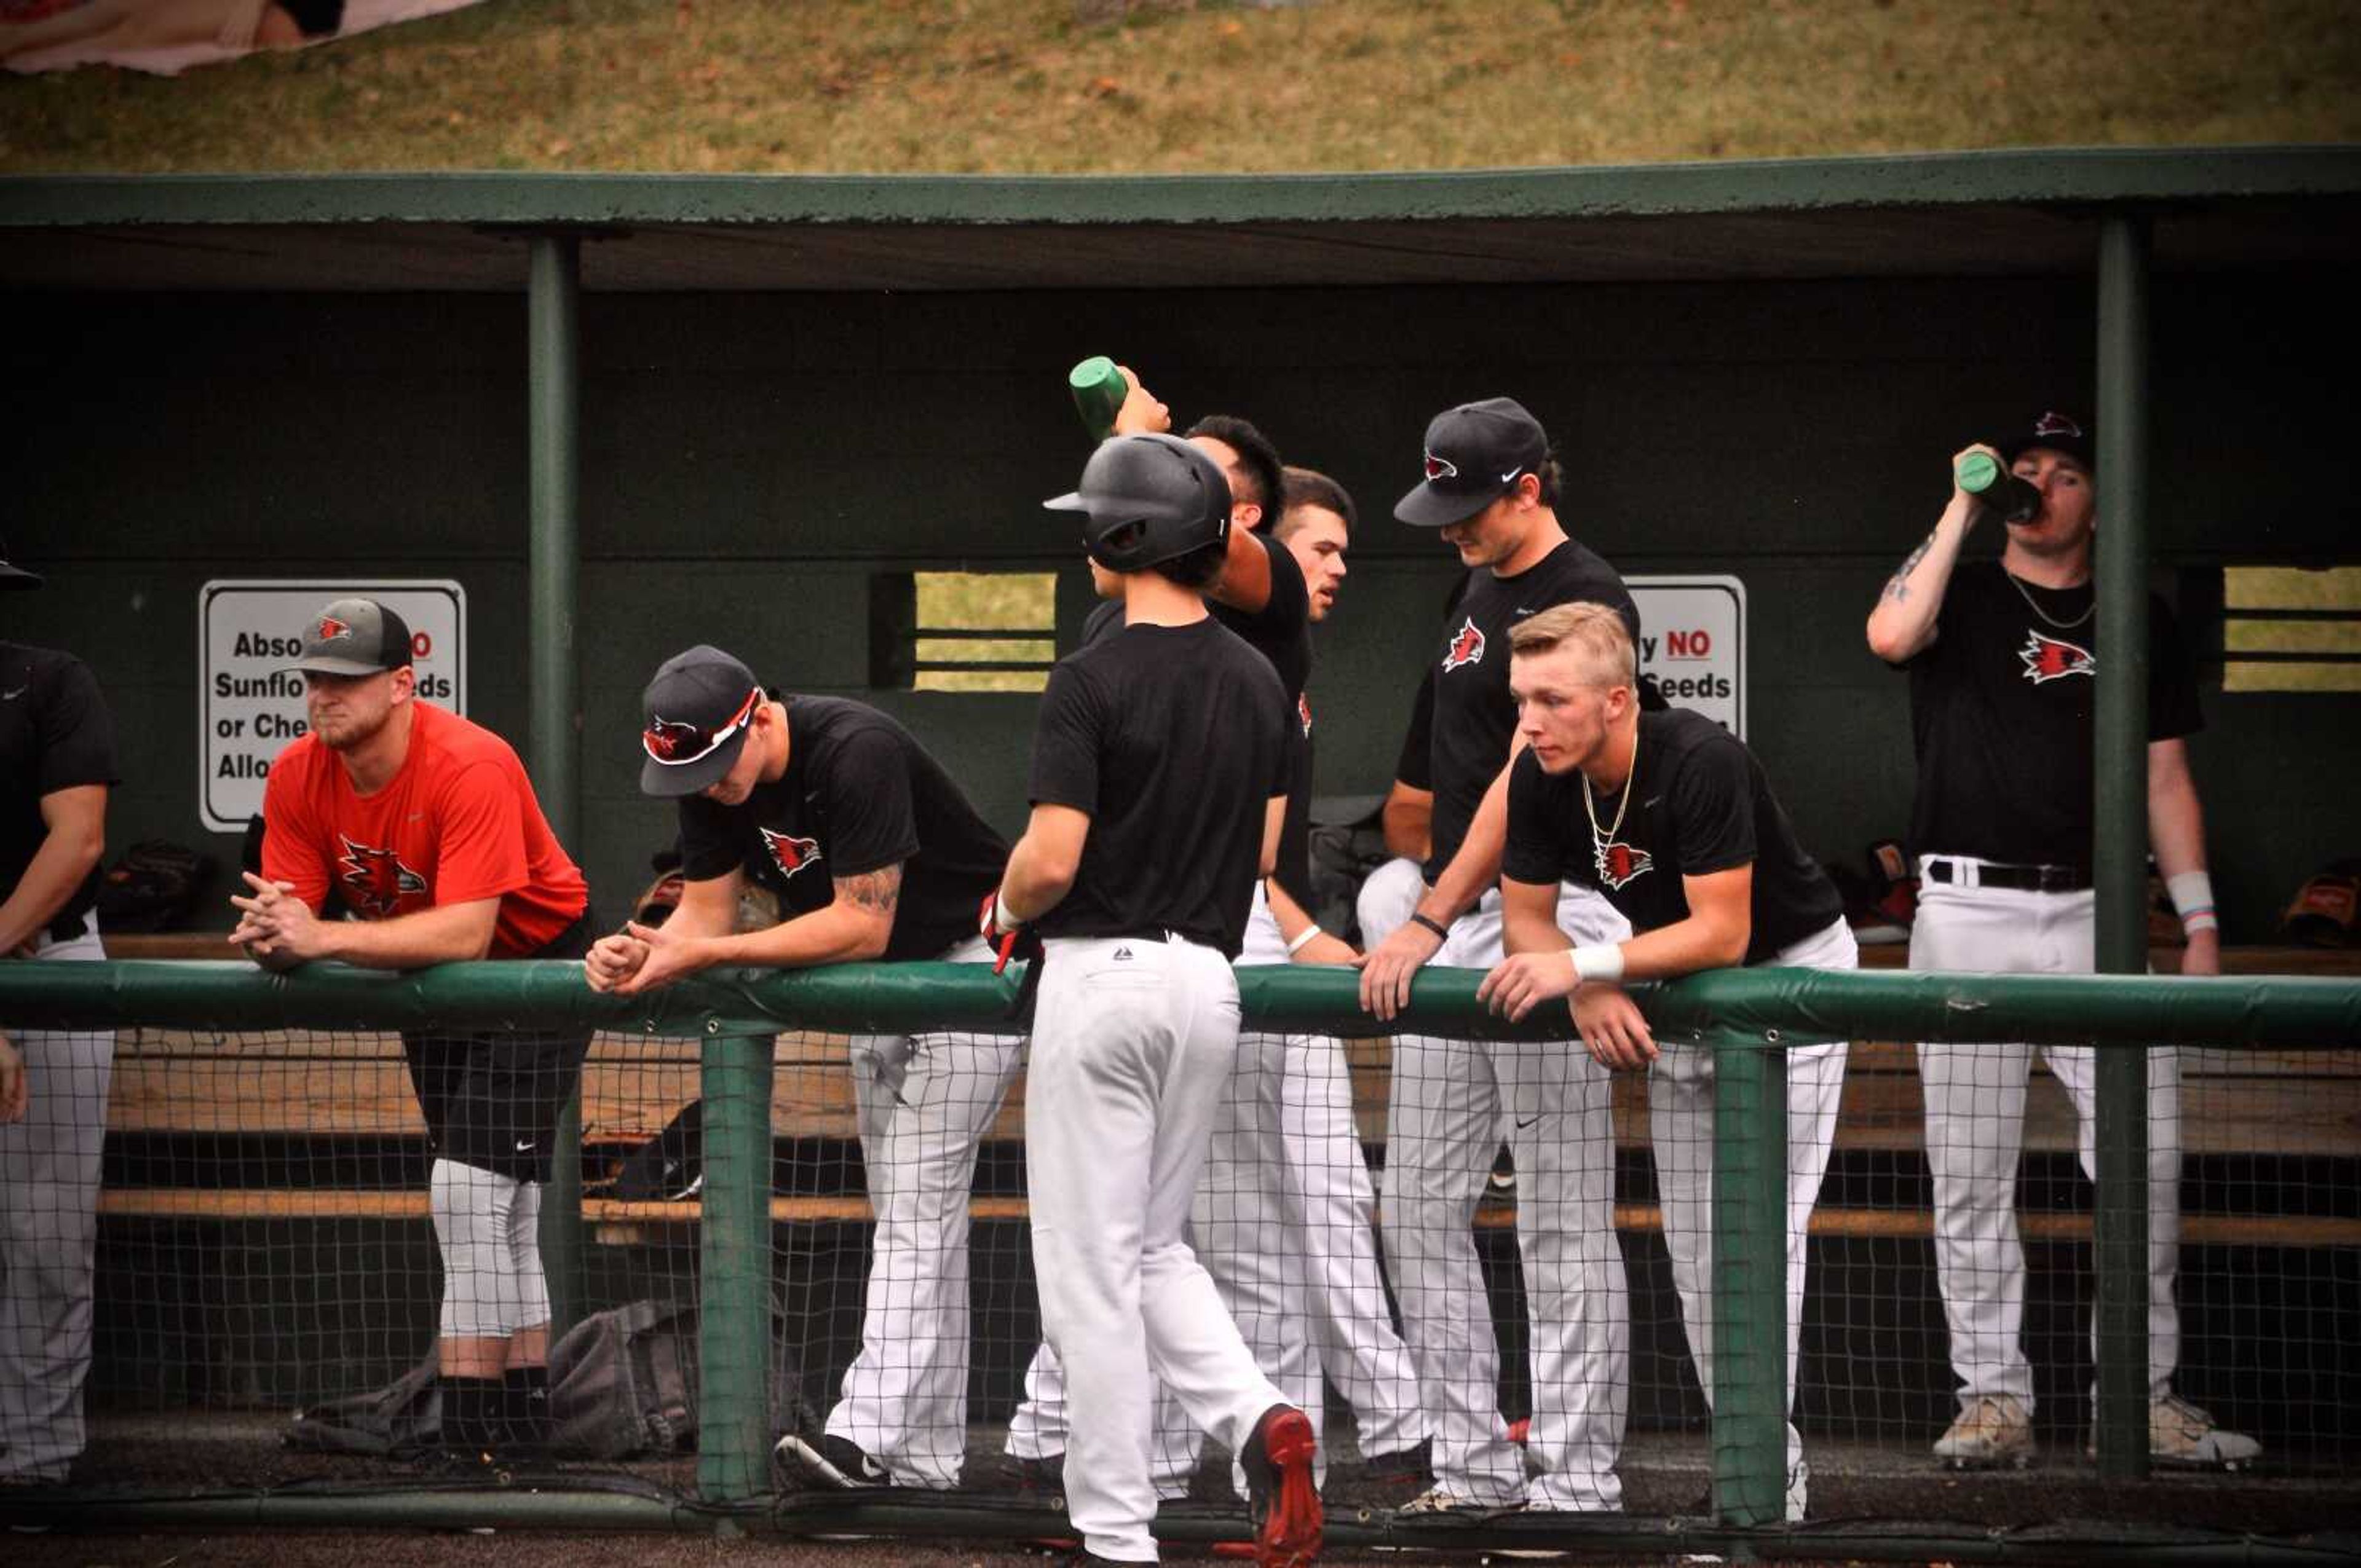 Southeast baseball played a scrimmage game at Capaha Field on Sept. 18 to prepare for the upcoming season.